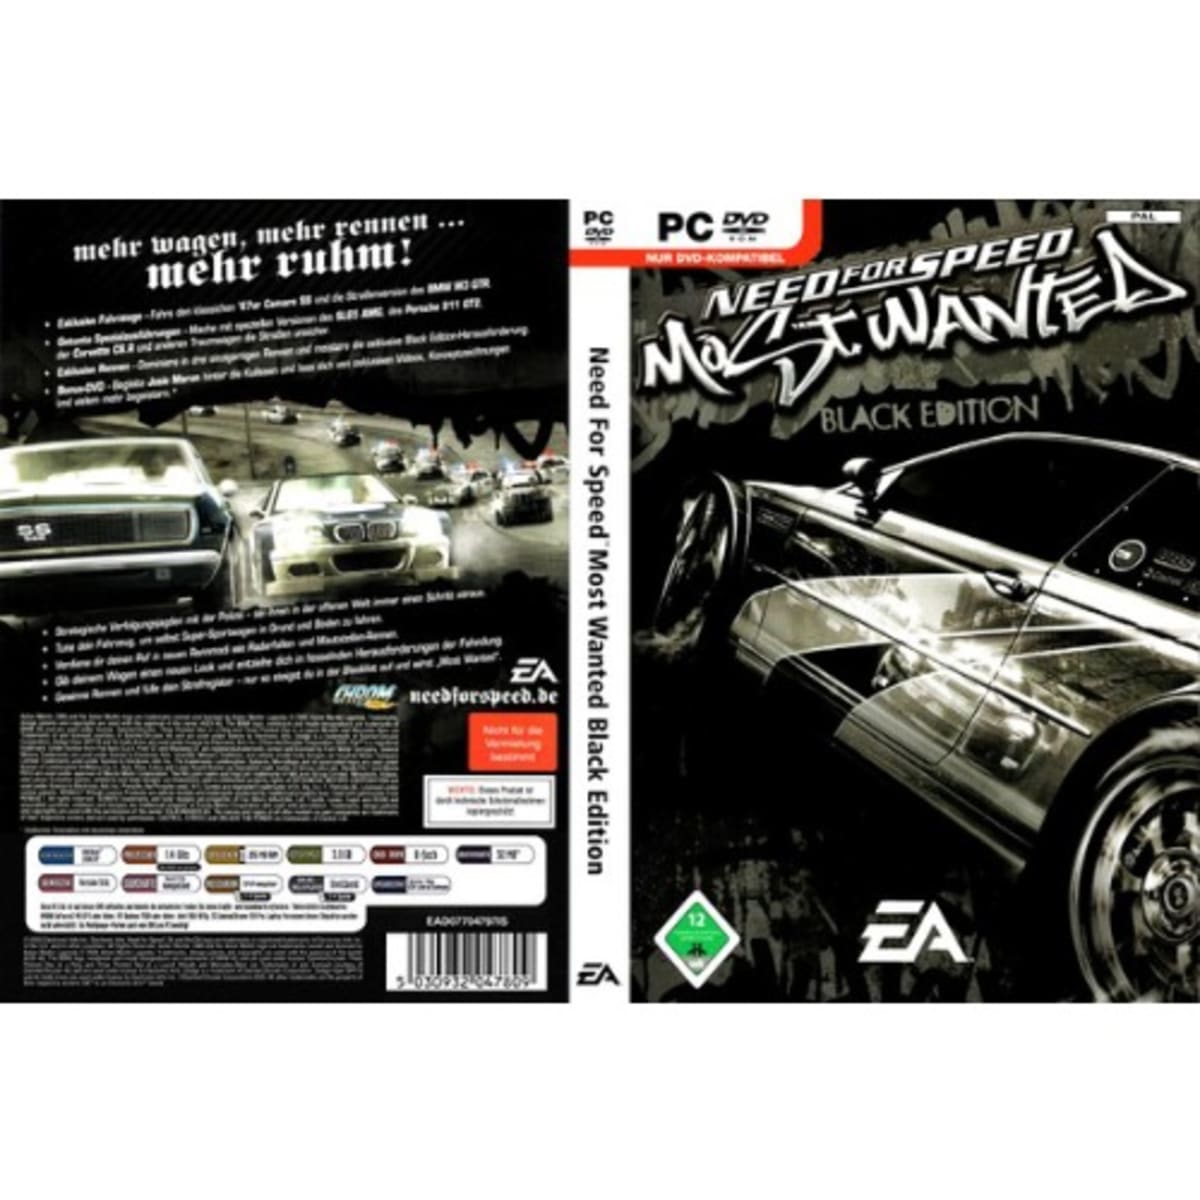 Need for Speed: Most Wanted Black Edition - CD-ROM - VERY GOOD